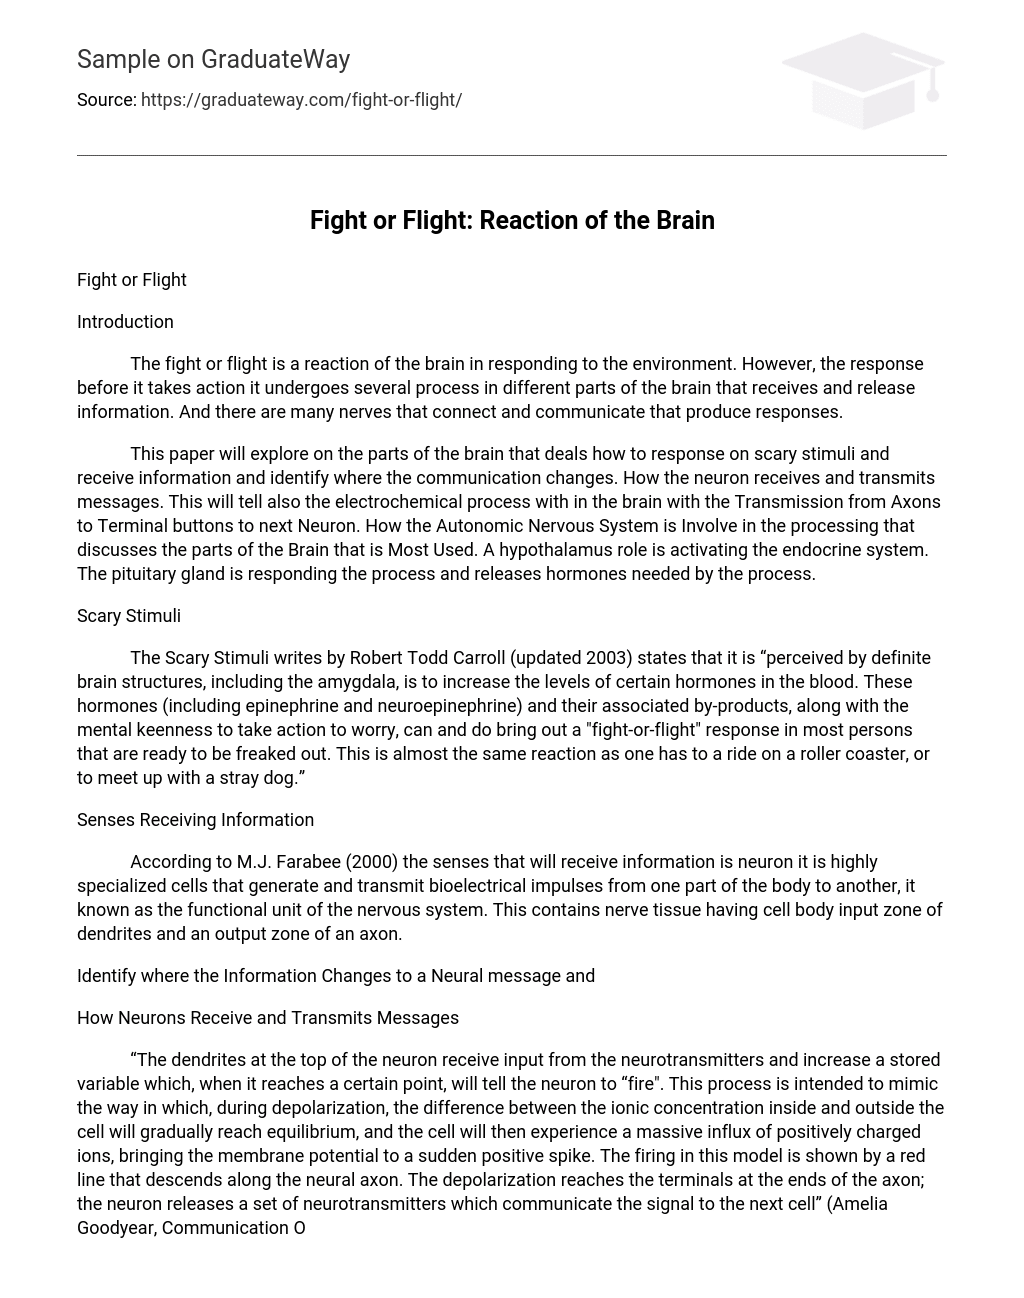 Fight or Flight: Reaction of the Brain